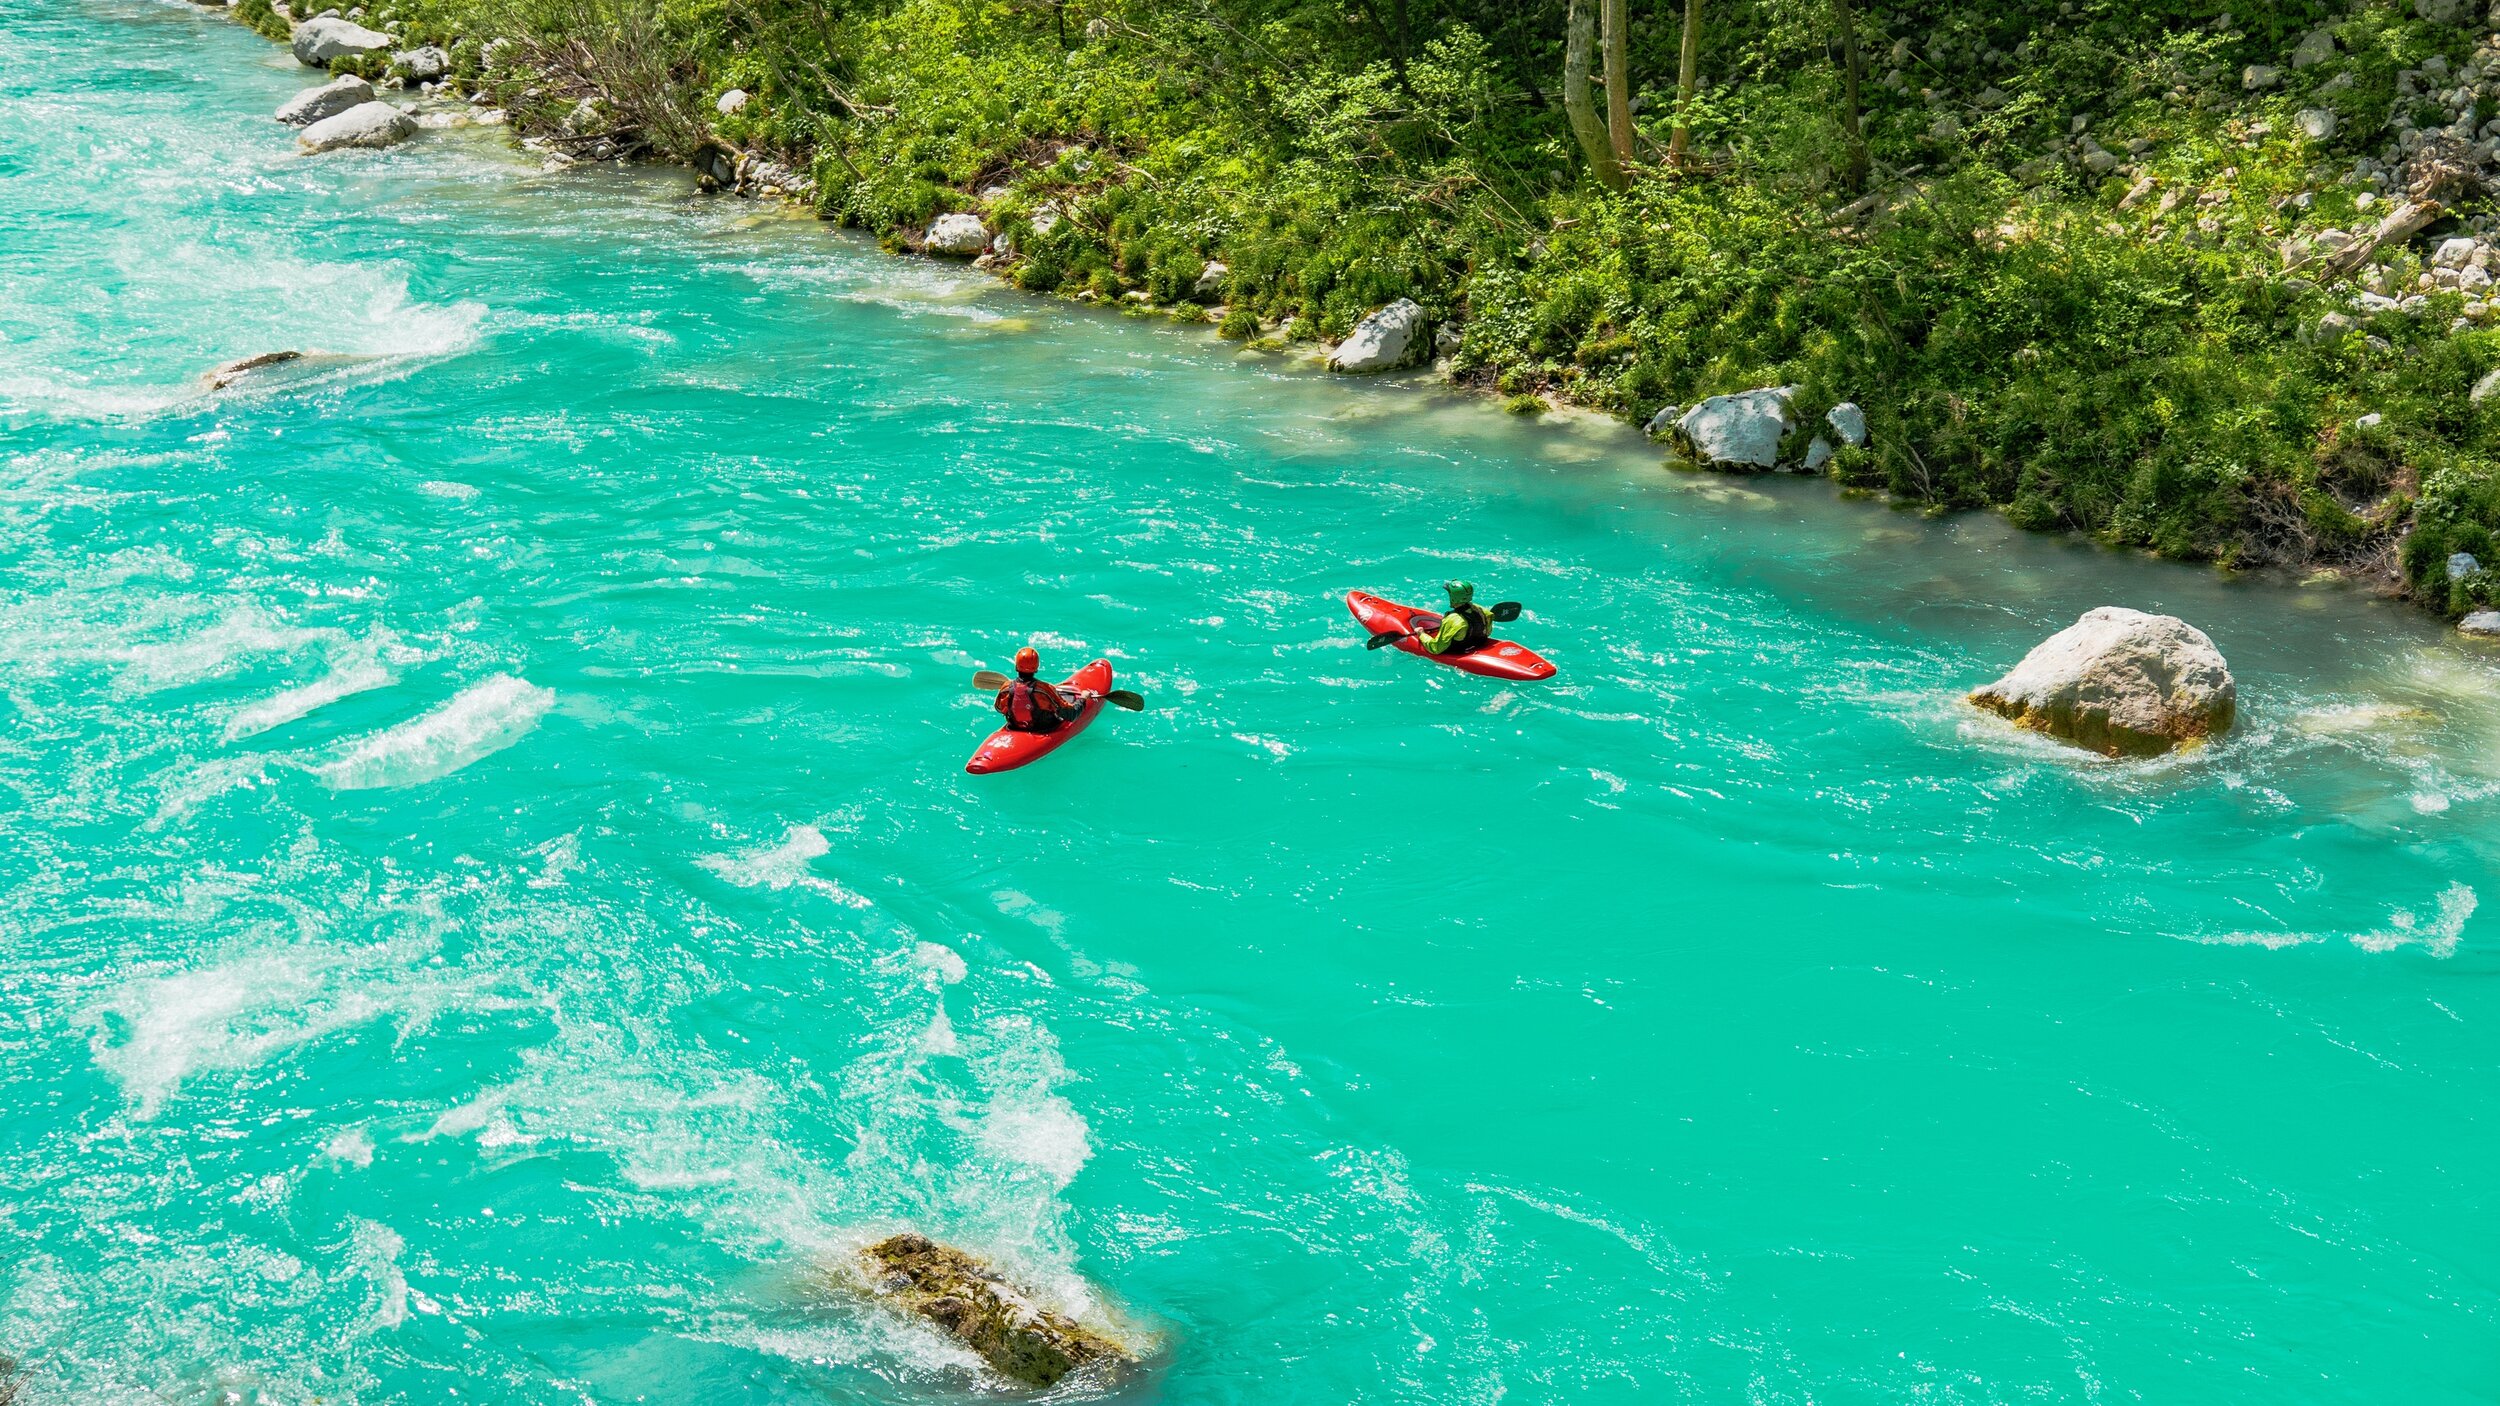 two-kayaks-on-an-emerald-river-outdoor-recreation-on-a-river-rowing-kayaking-adventure-green-sports_t20_EnYnLY.jpg